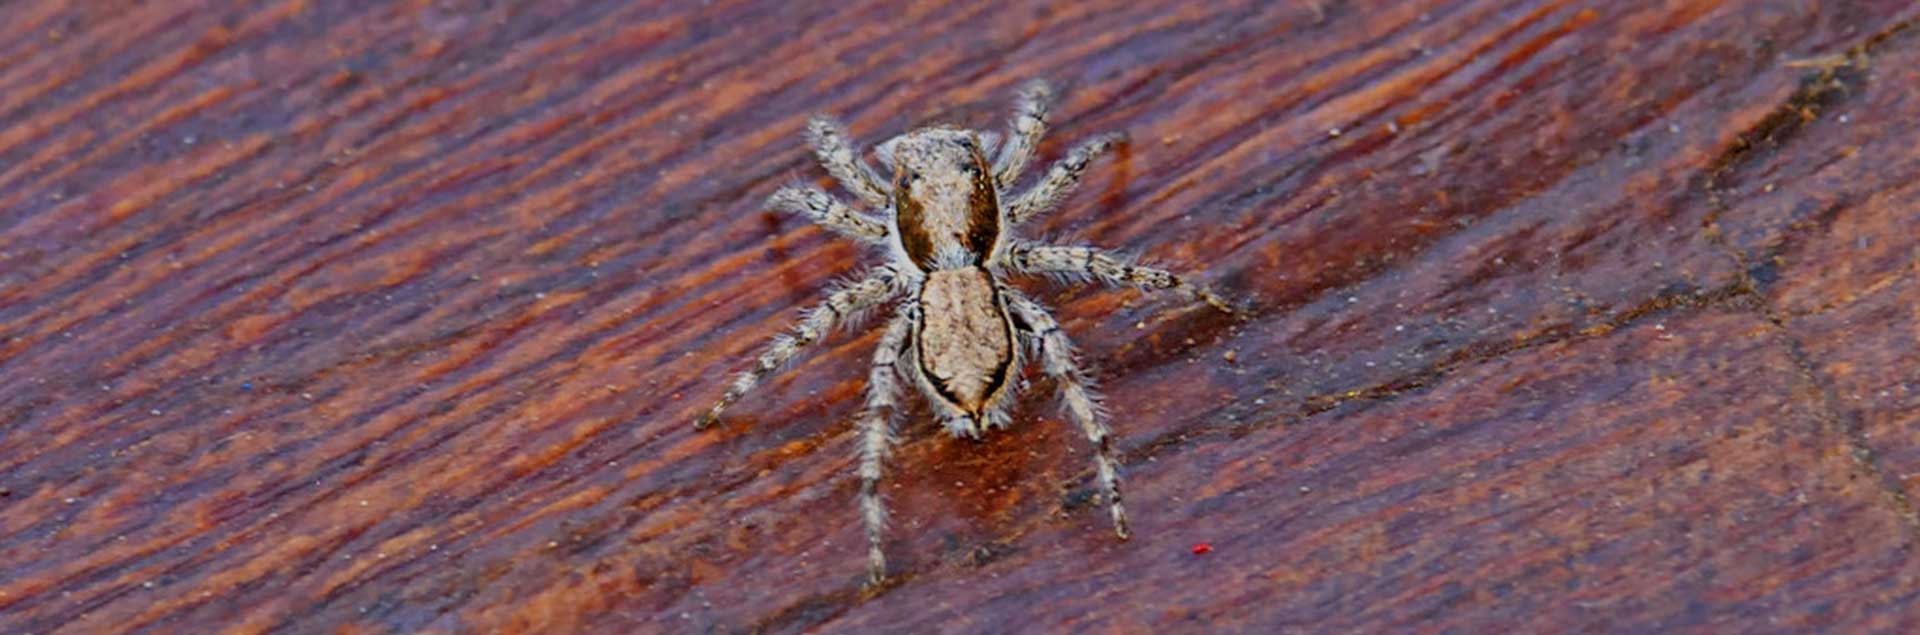 Dealing with Gray Wall Jumper Spiders in San Diego – Expert Tips